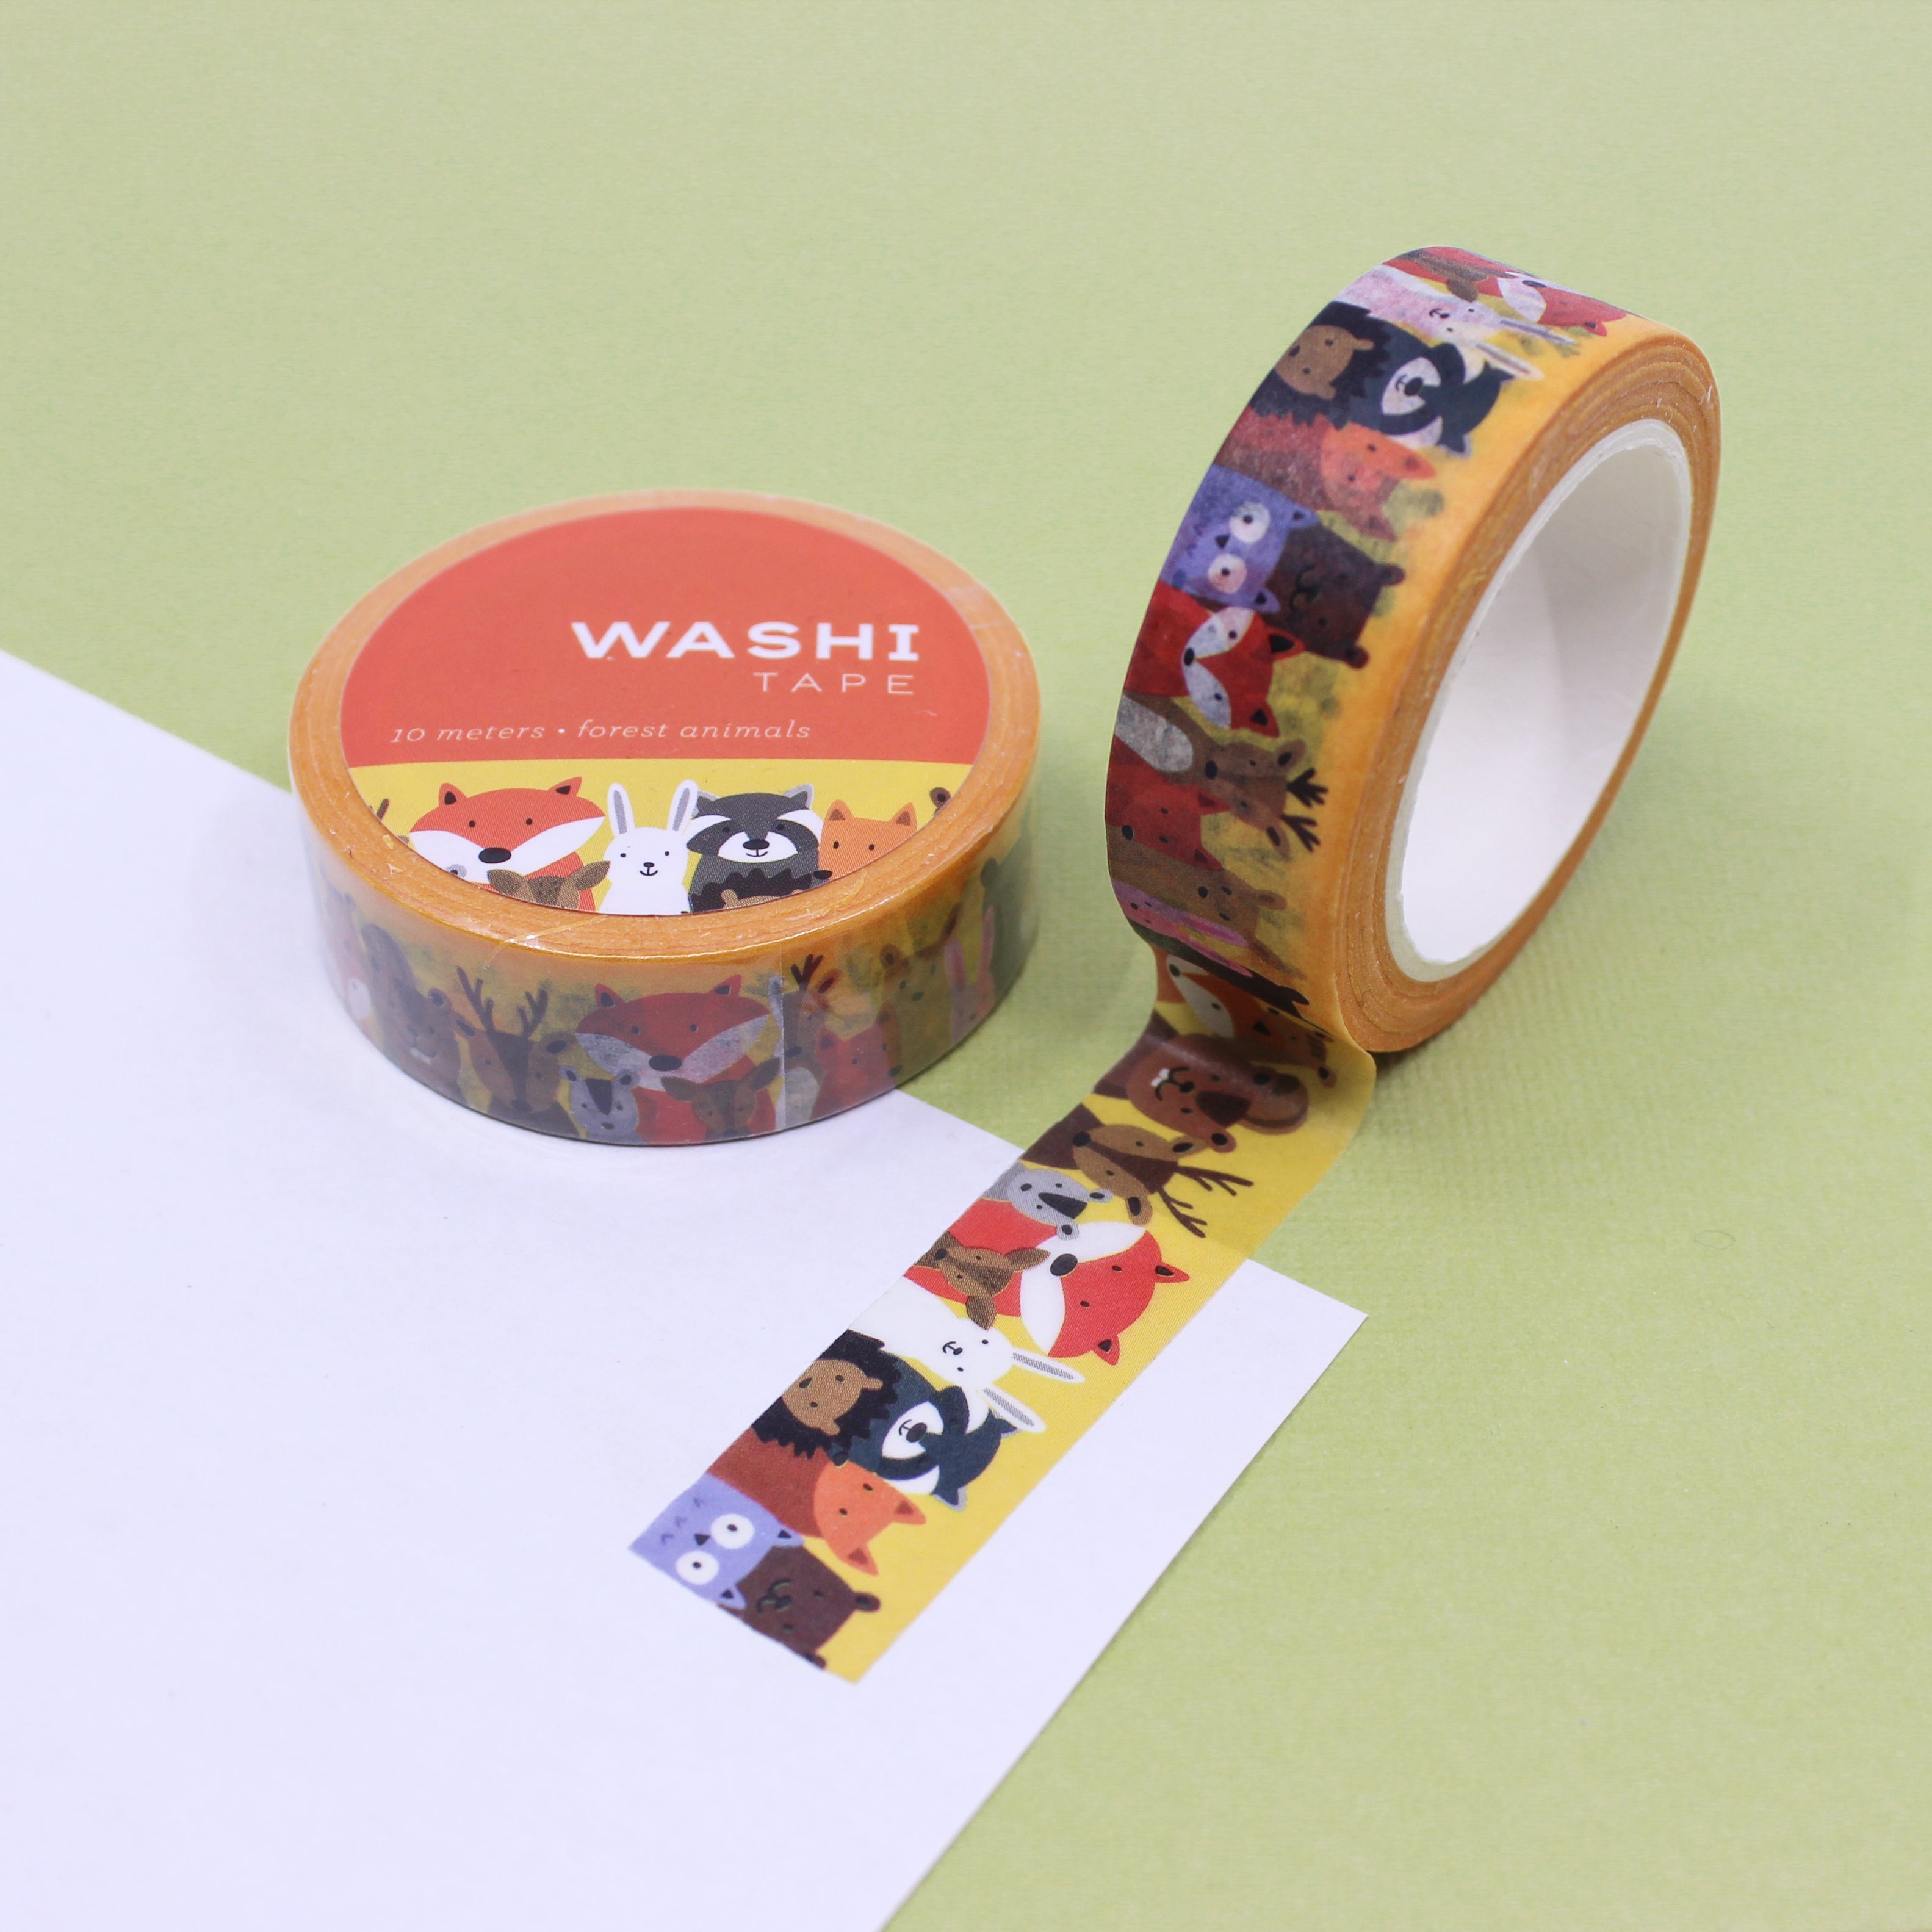 This is a yellow foil woodland animal creatures pattern washi tape from BBB Supplies Craft Shop